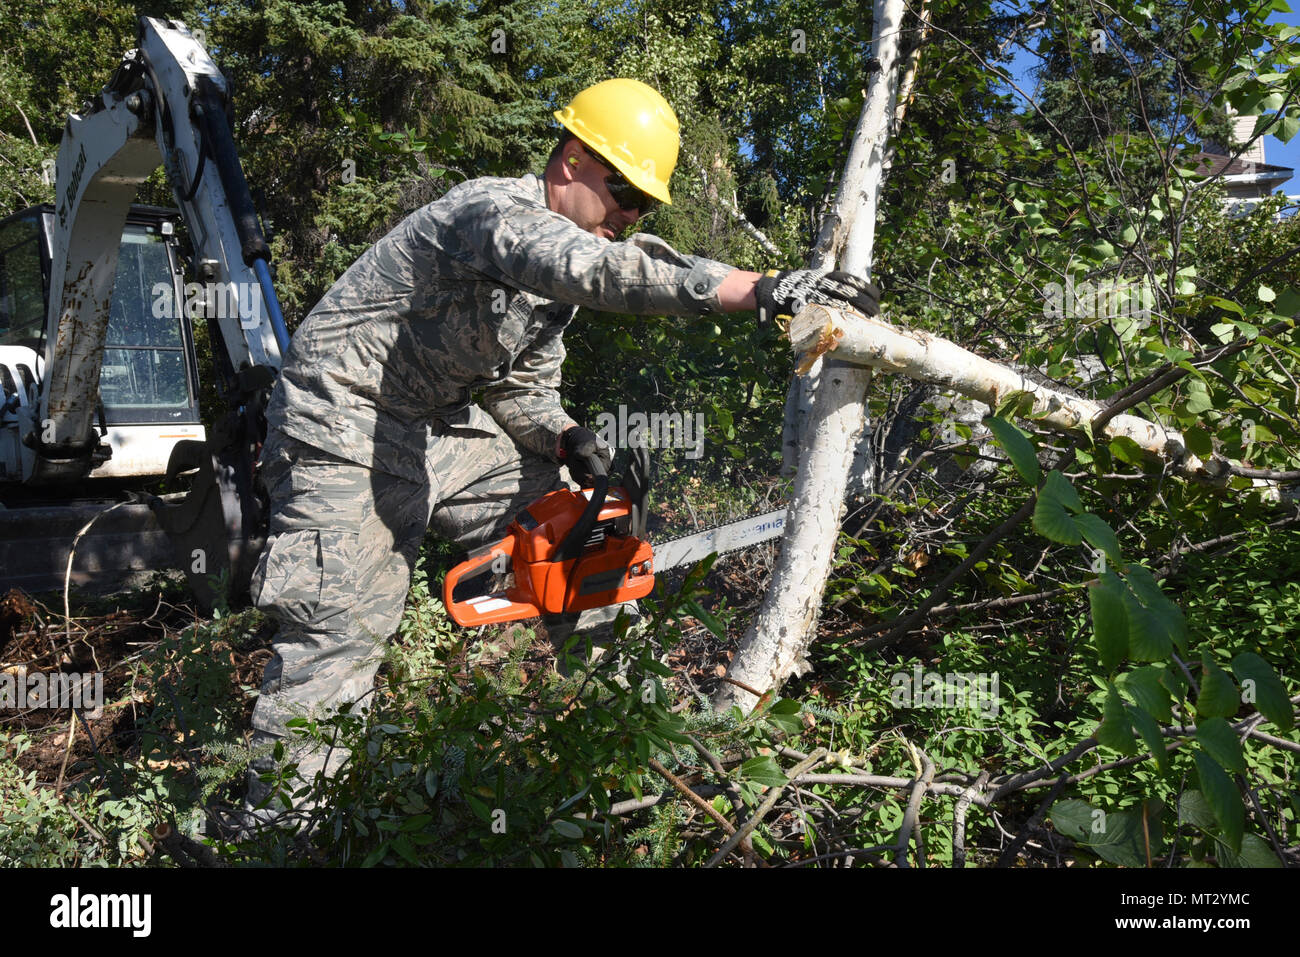 Oregon Air National Guard Staff Sgt. Daniel Hagemier, assigned to the 142nd Fighter Wing Civil Engineers, uses a chain saw to clear trees and form a path to extend a public trail at Niven Lake at City of Yellowknife, Northwest Territories, Canada, July 18, 2017. As one of many projects during the 142nd CES Deployment for Training (DFT) the Niven Lake trail will connect two unfinished parts providing greater access to the community. (U.S. Air National Guard photo/Master Sgt. John Hughel, 142nd Fighter Wing Public Affairs) Stock Photo